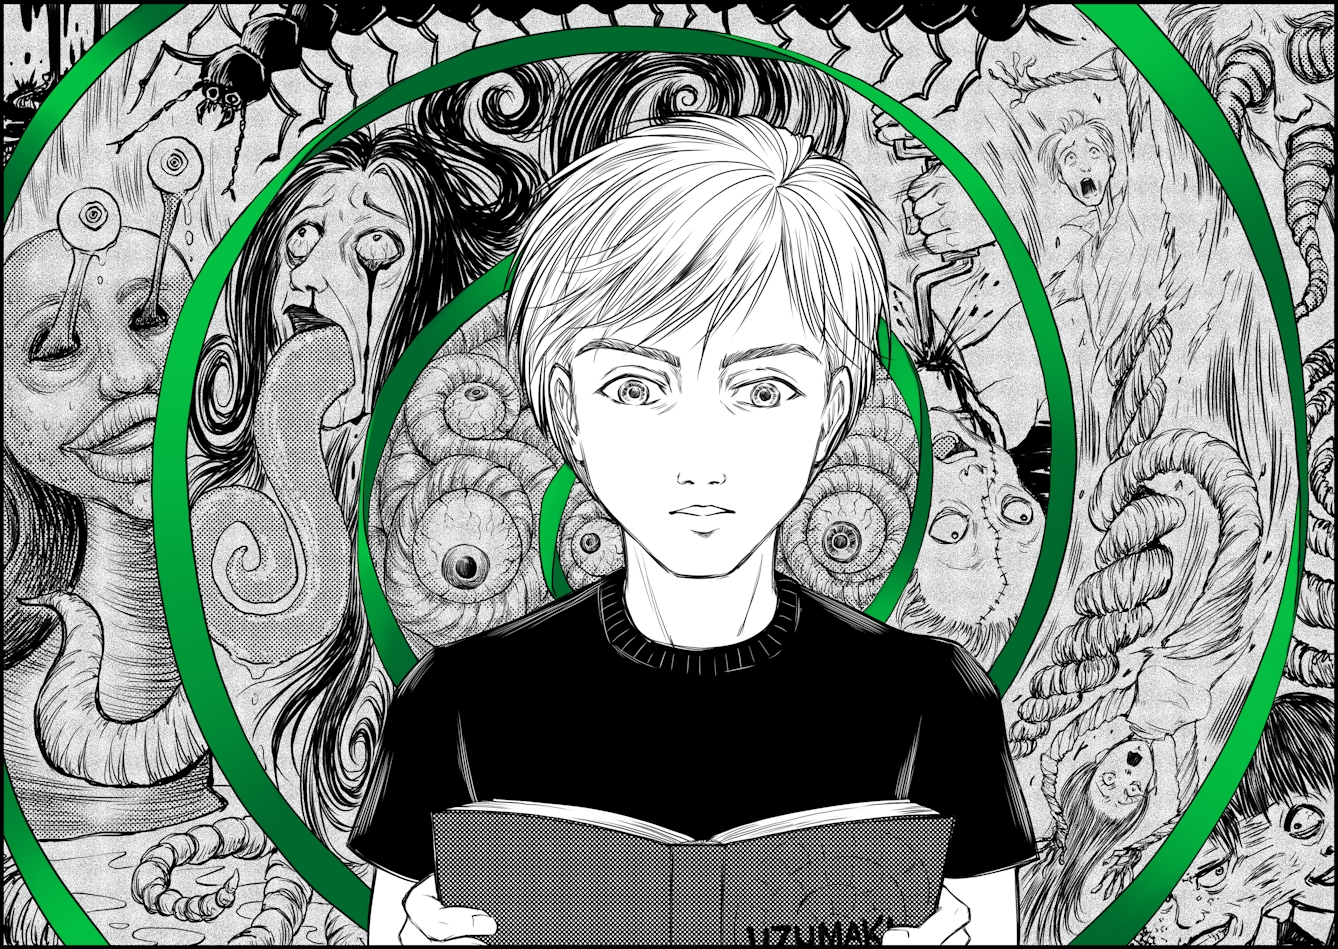 Illustration in the style of Manga graphic novels, showing a young person looking at an open book titled, Uzumaki. Behind them is a spiralling green ribbon, within which are body horror illustrations of faces with bleeding eyes, giant tongues, tentacles, insects, stitched up faces and expressions of horror.